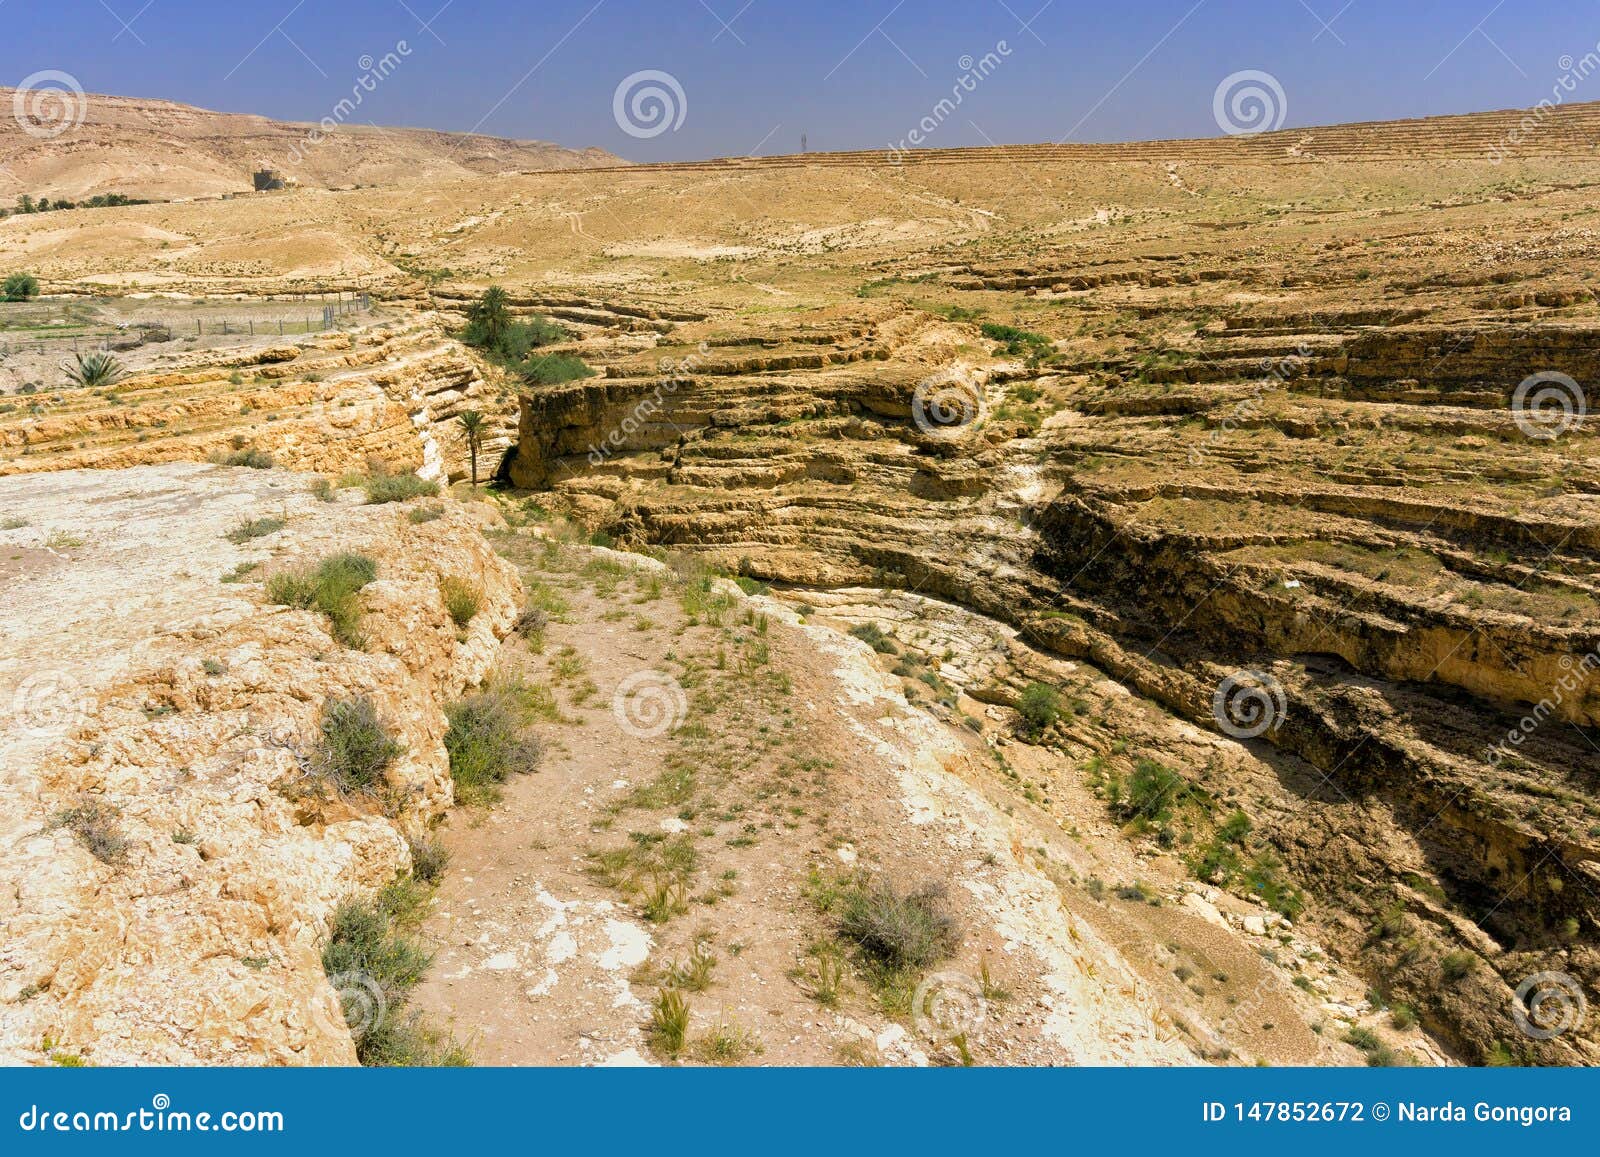 panorama of canyon in mides, tunisia